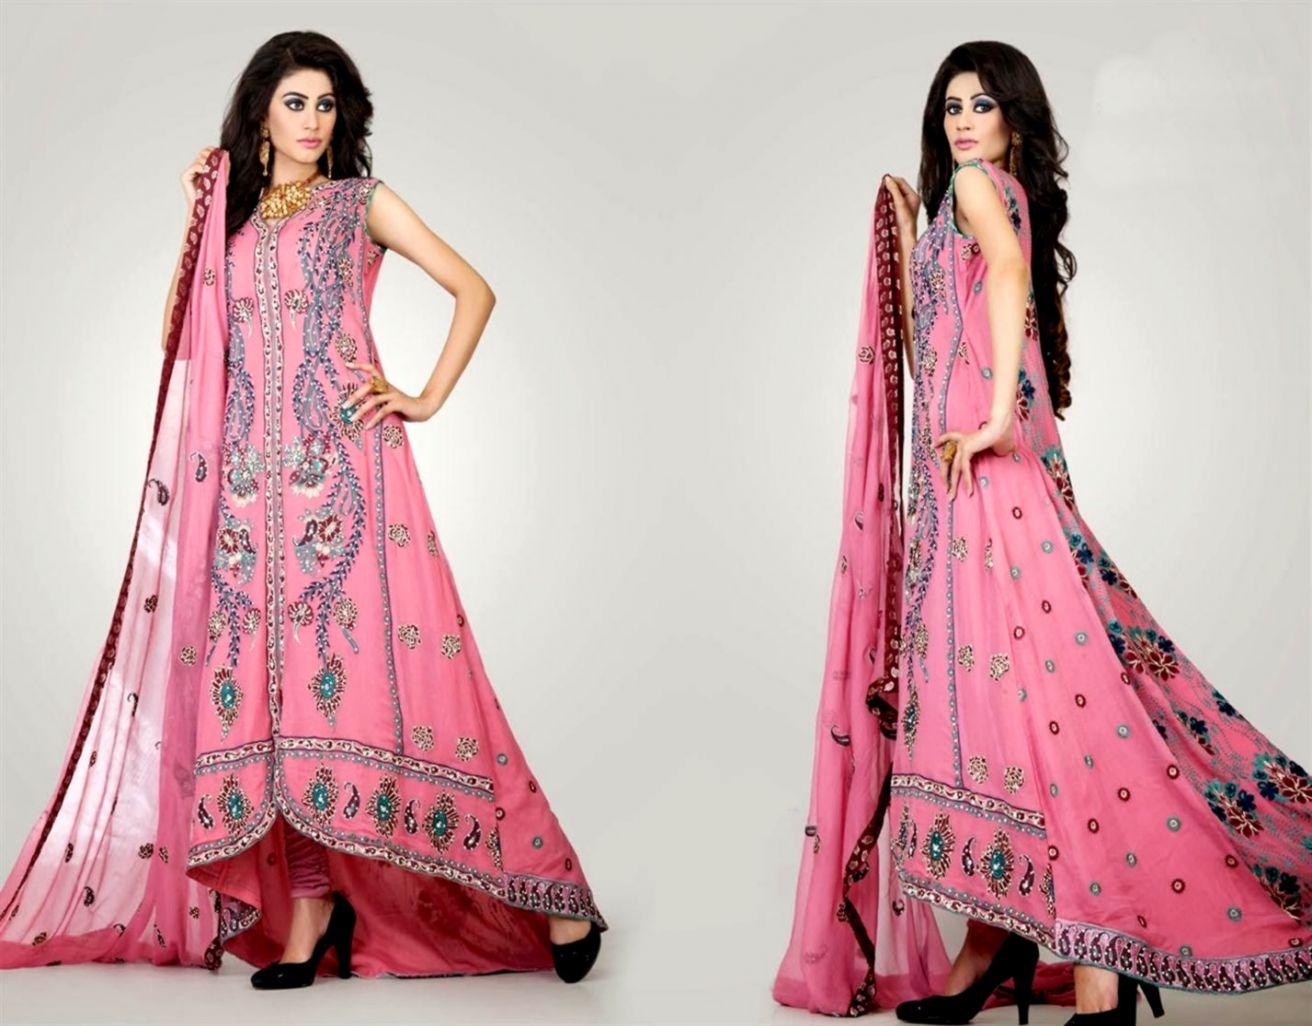 Few Tips that could help in buying the right Shalwar Kameez